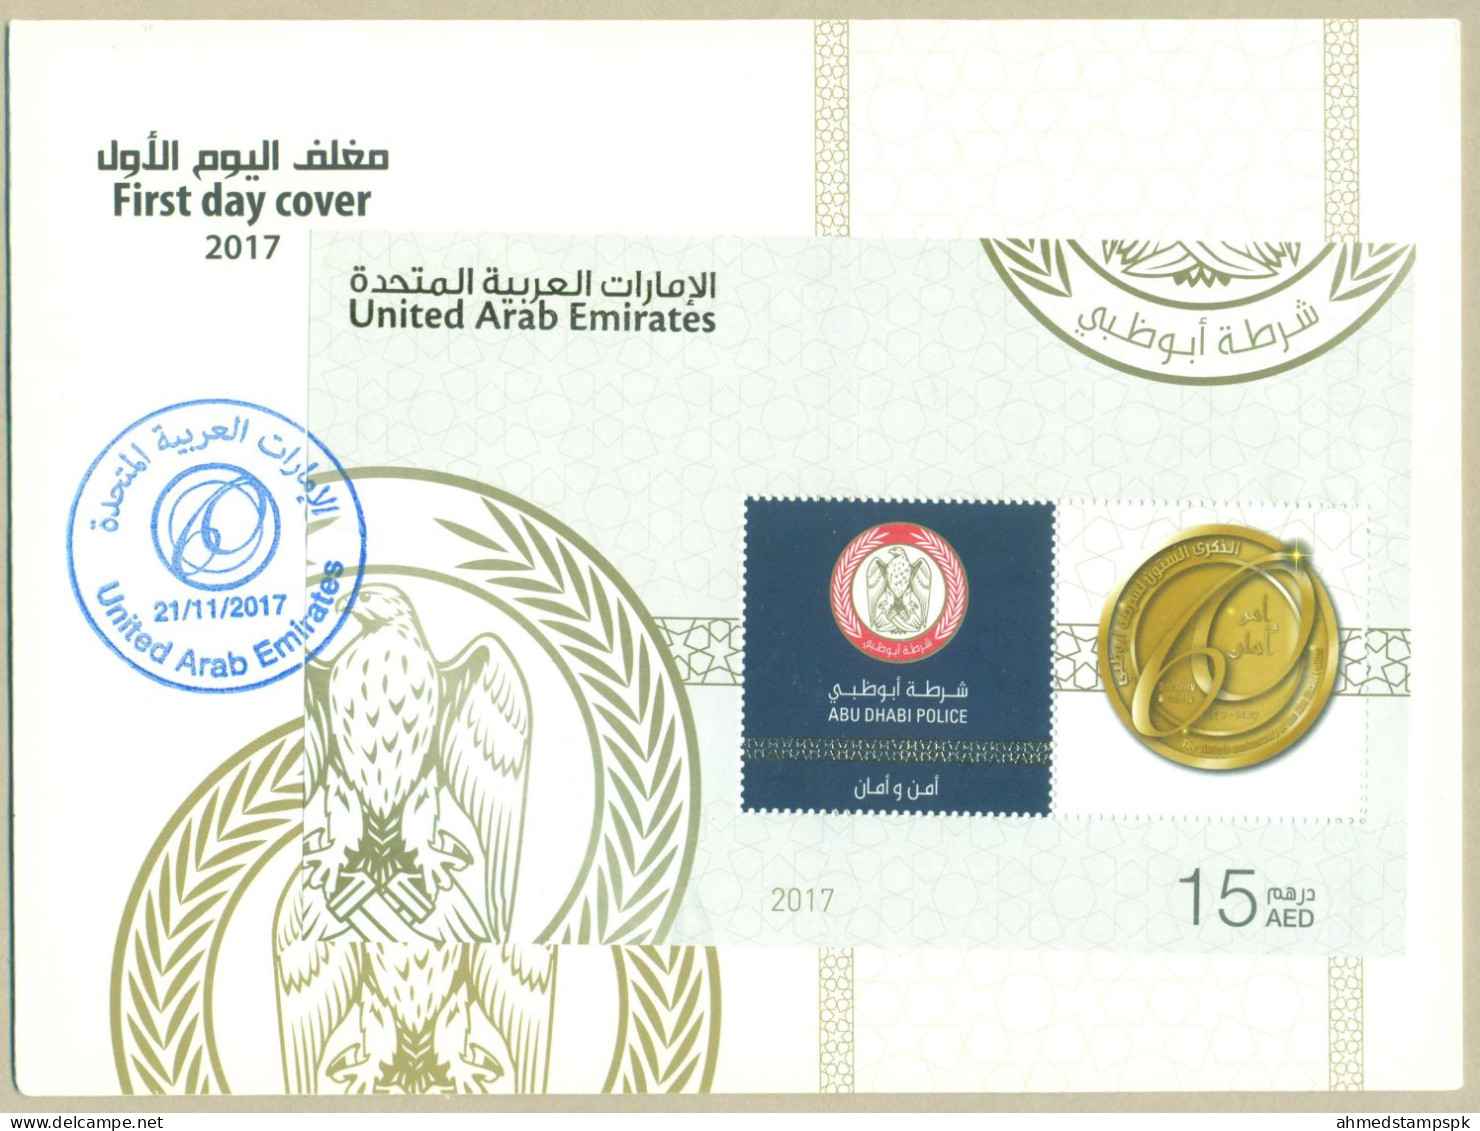 UAE UNITED ARAB EMIRATES FDC FIRST DAY COVER 2017 MNH MS ABU DHABI POLICE - United Arab Emirates (General)